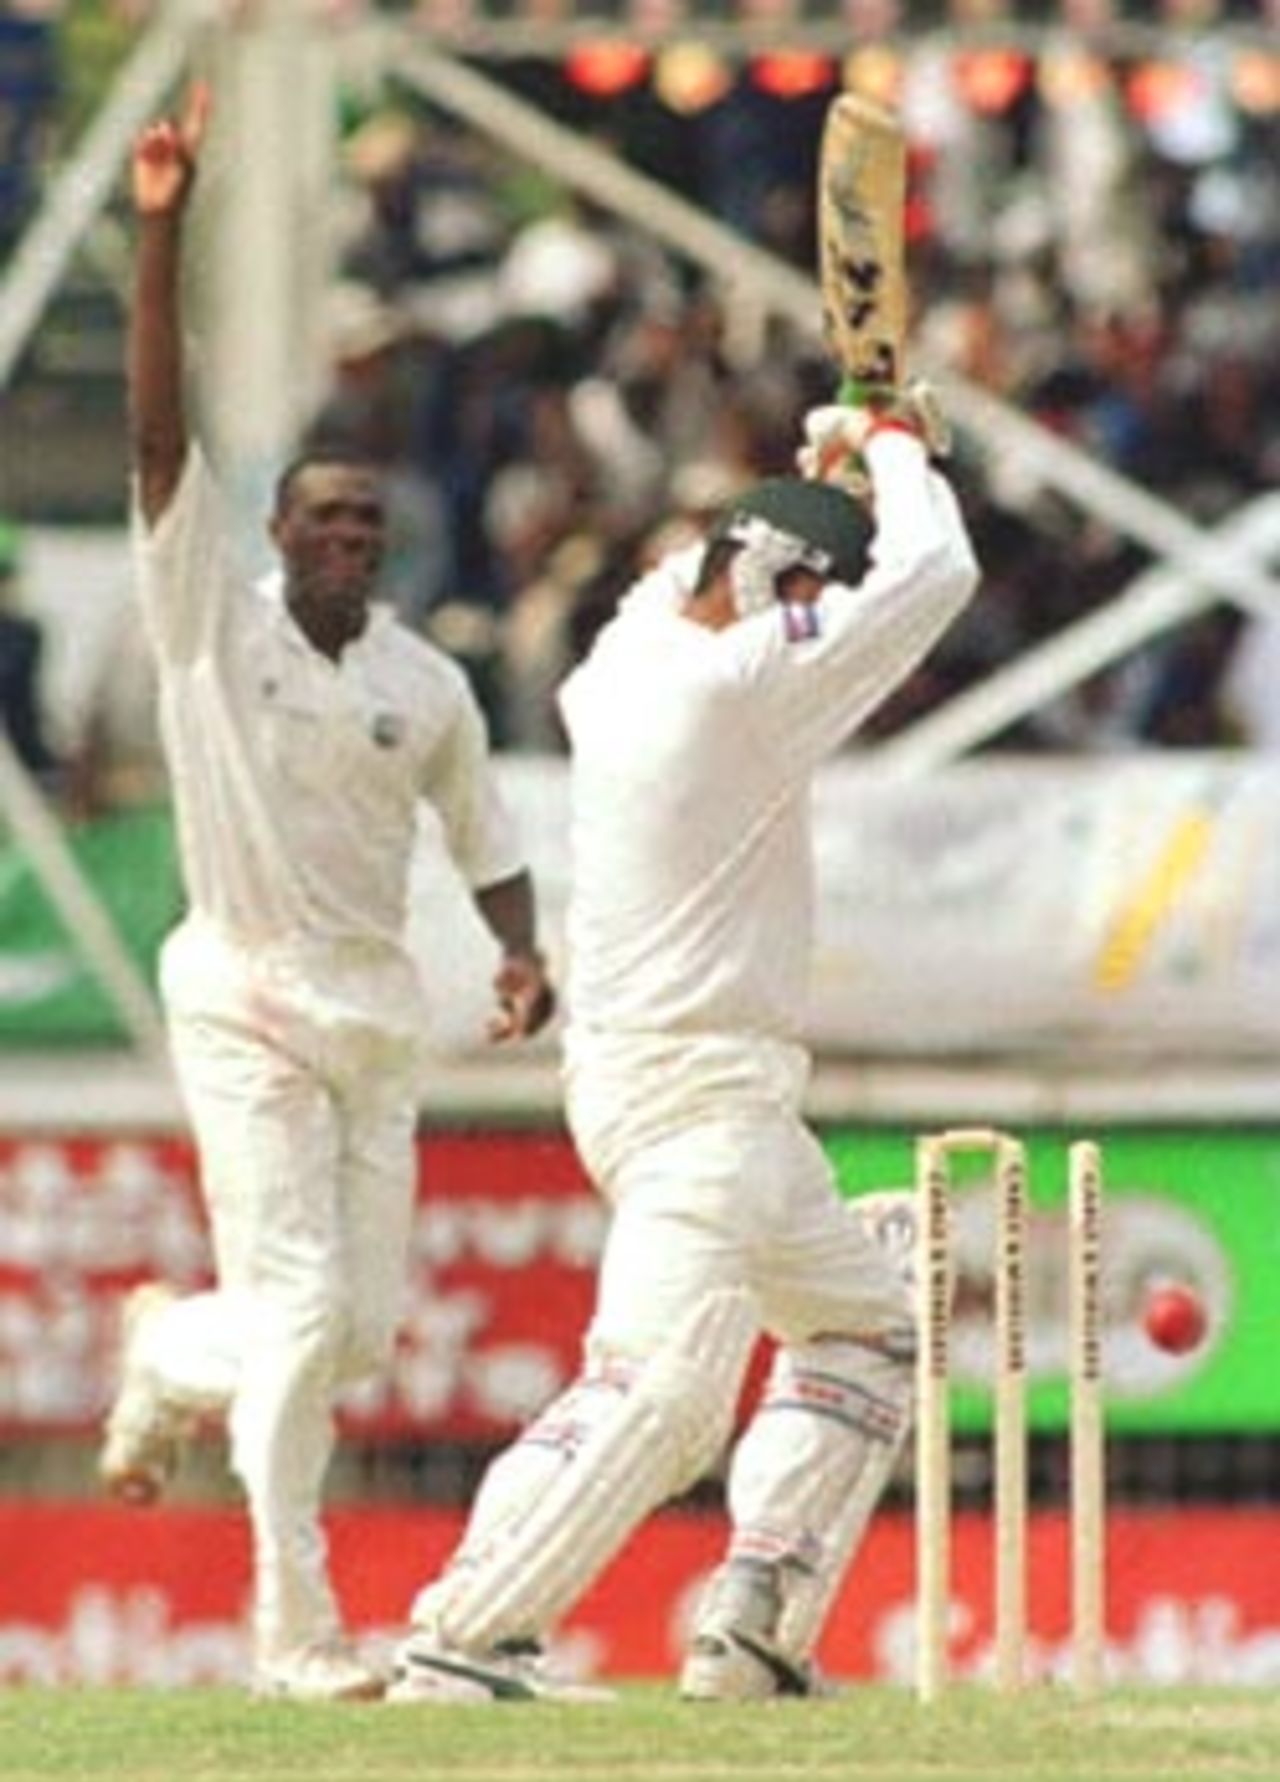 Pakistan's Mohammad Wasim (R) is bowled by West Indies' Reon King 27 May, 2000, during the third day of the third and deciding test at Antigua. Pakistan in West Indies 1999/00, 3rd Test, West Indies v Pakistan, Antigua Recreation Ground, St John's, Antigua, (25-29 May 2000) Day 3